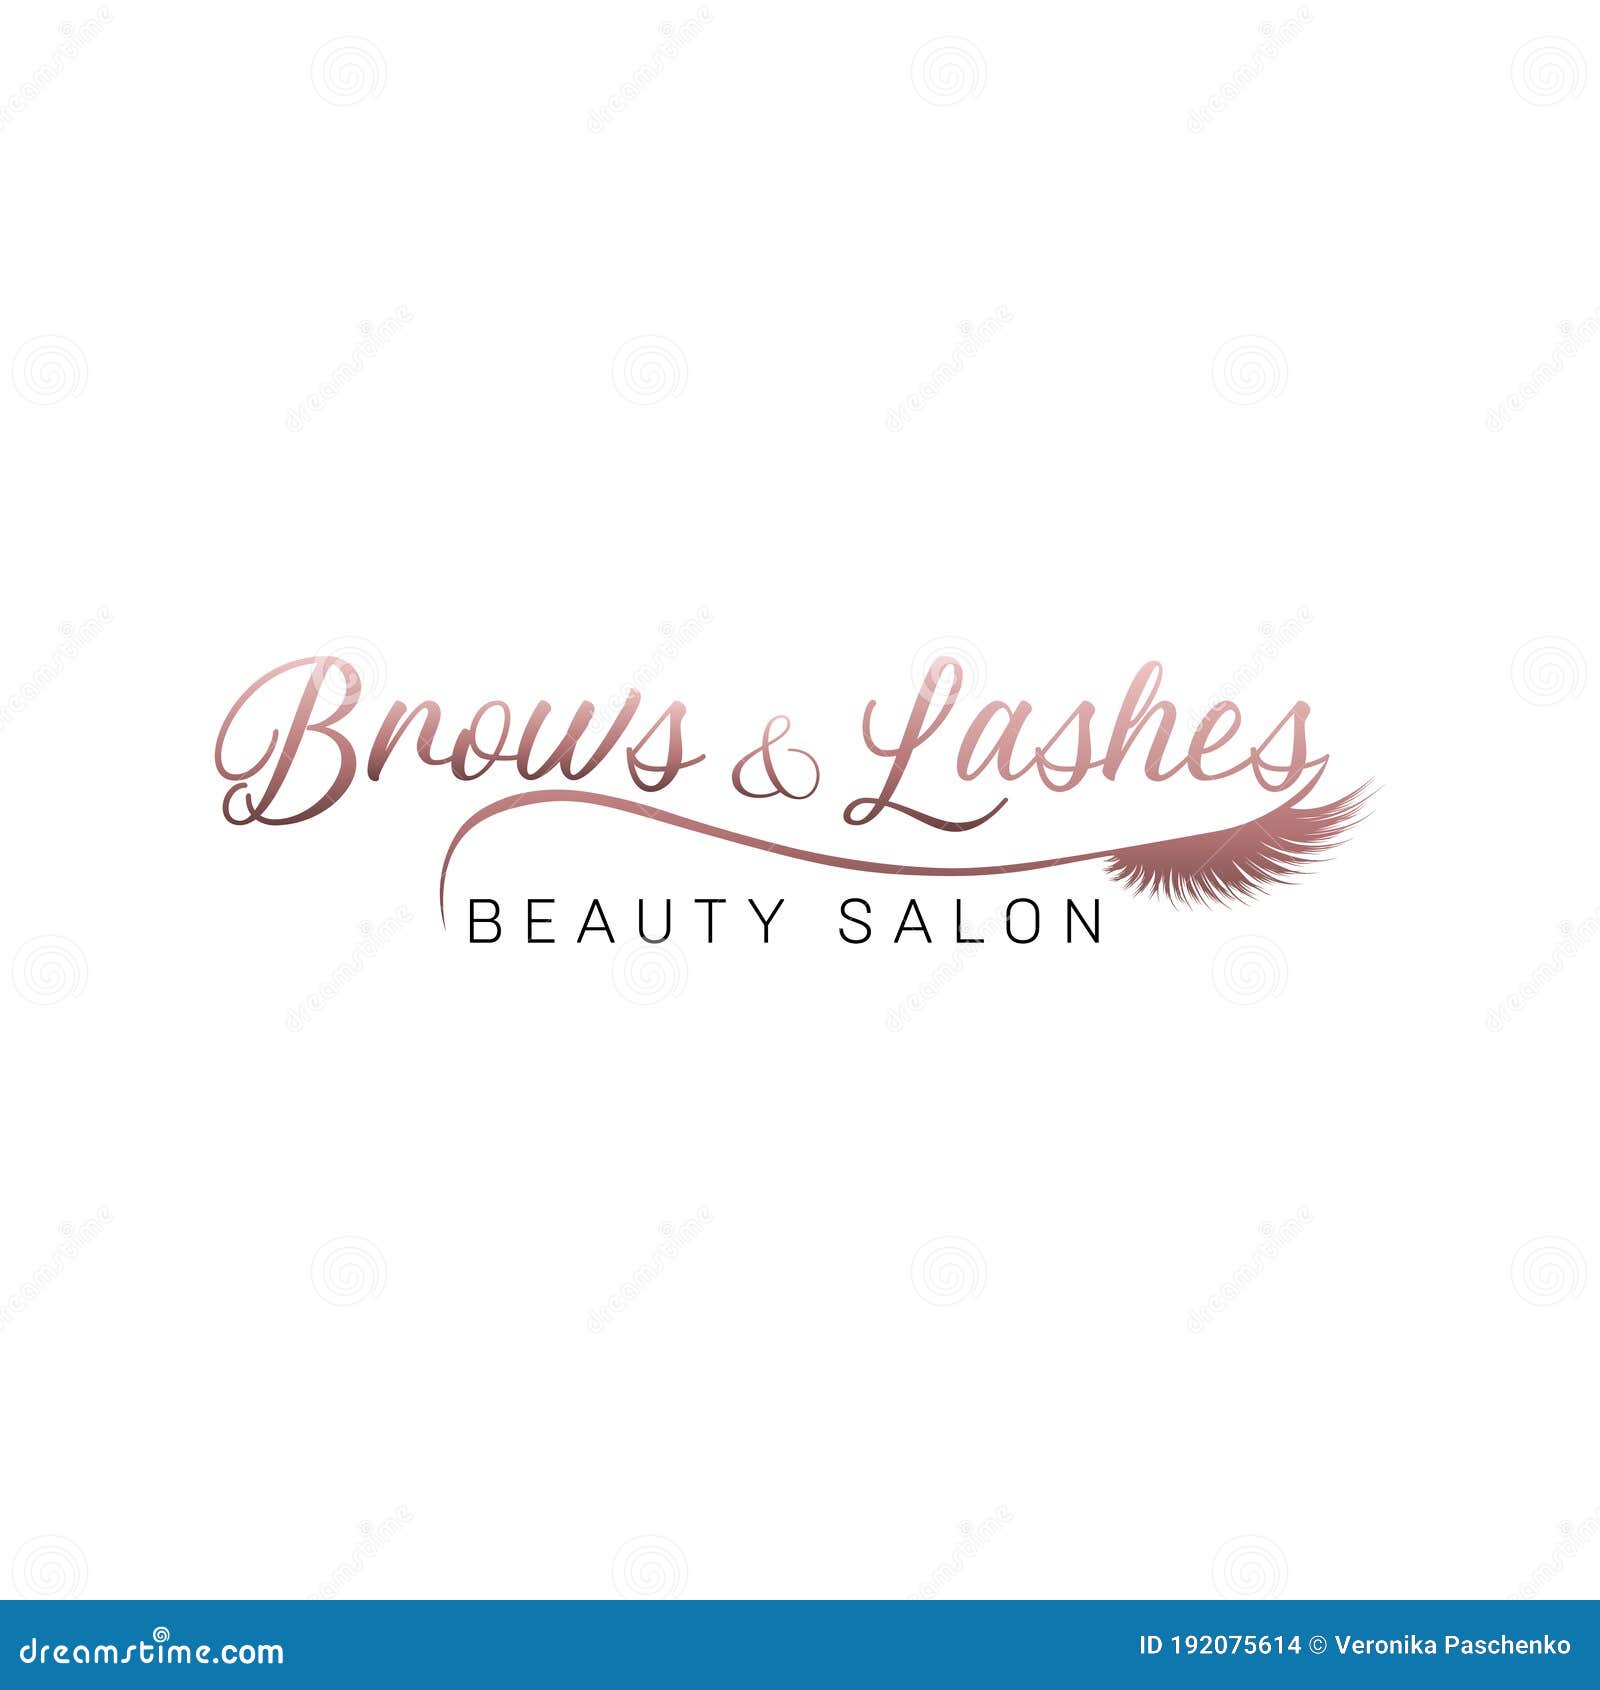 brows and lashes logo 